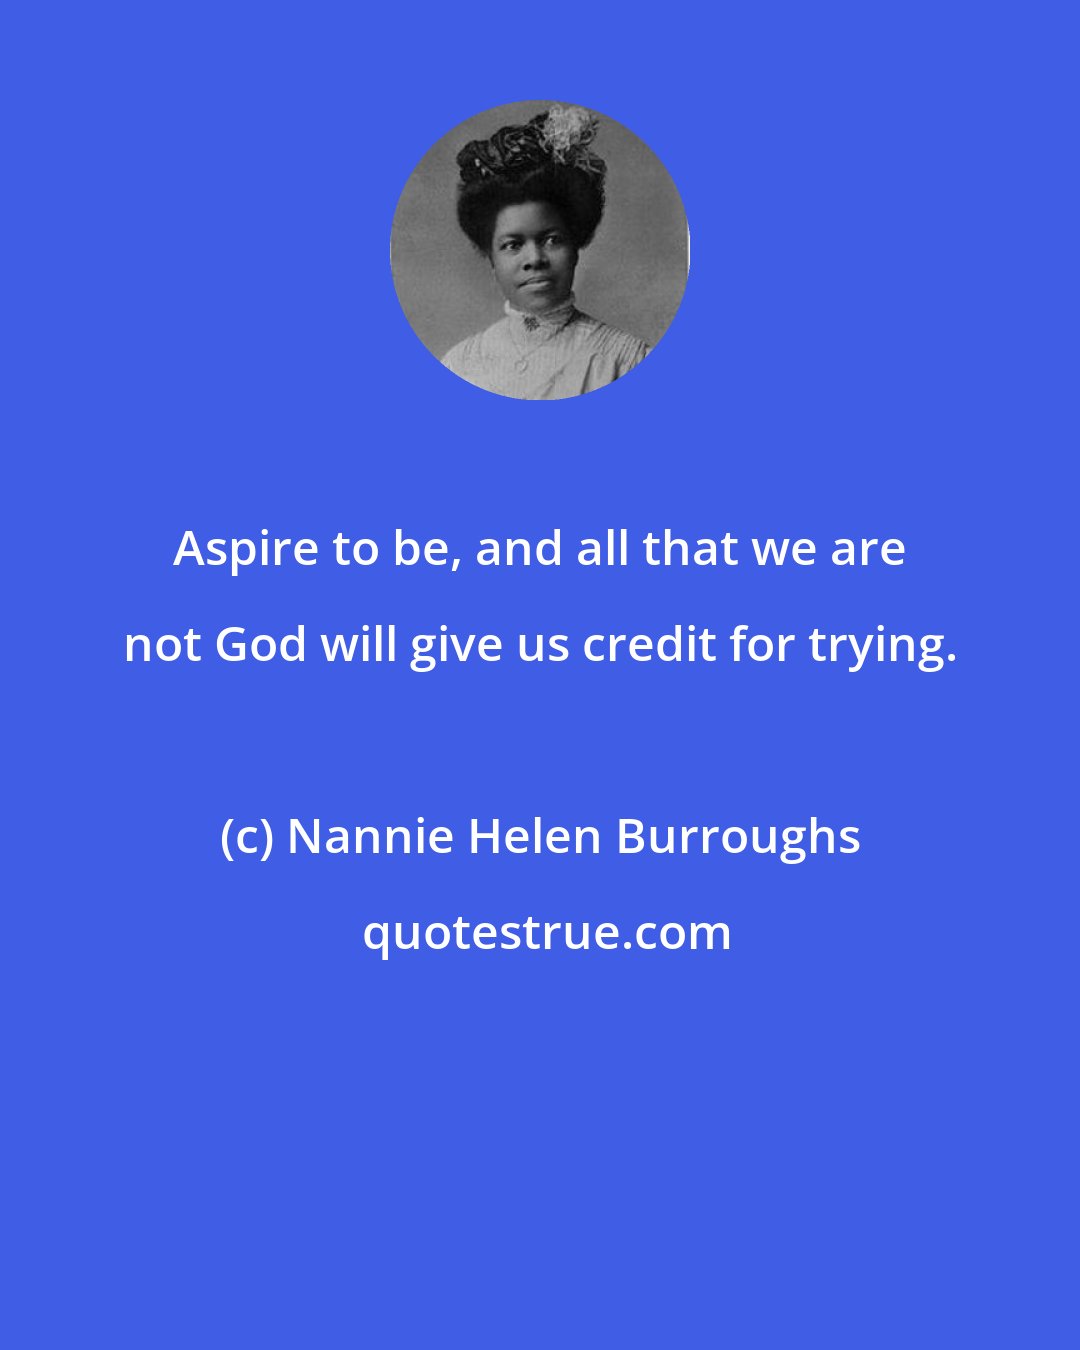 Nannie Helen Burroughs: Aspire to be, and all that we are not God will give us credit for trying.